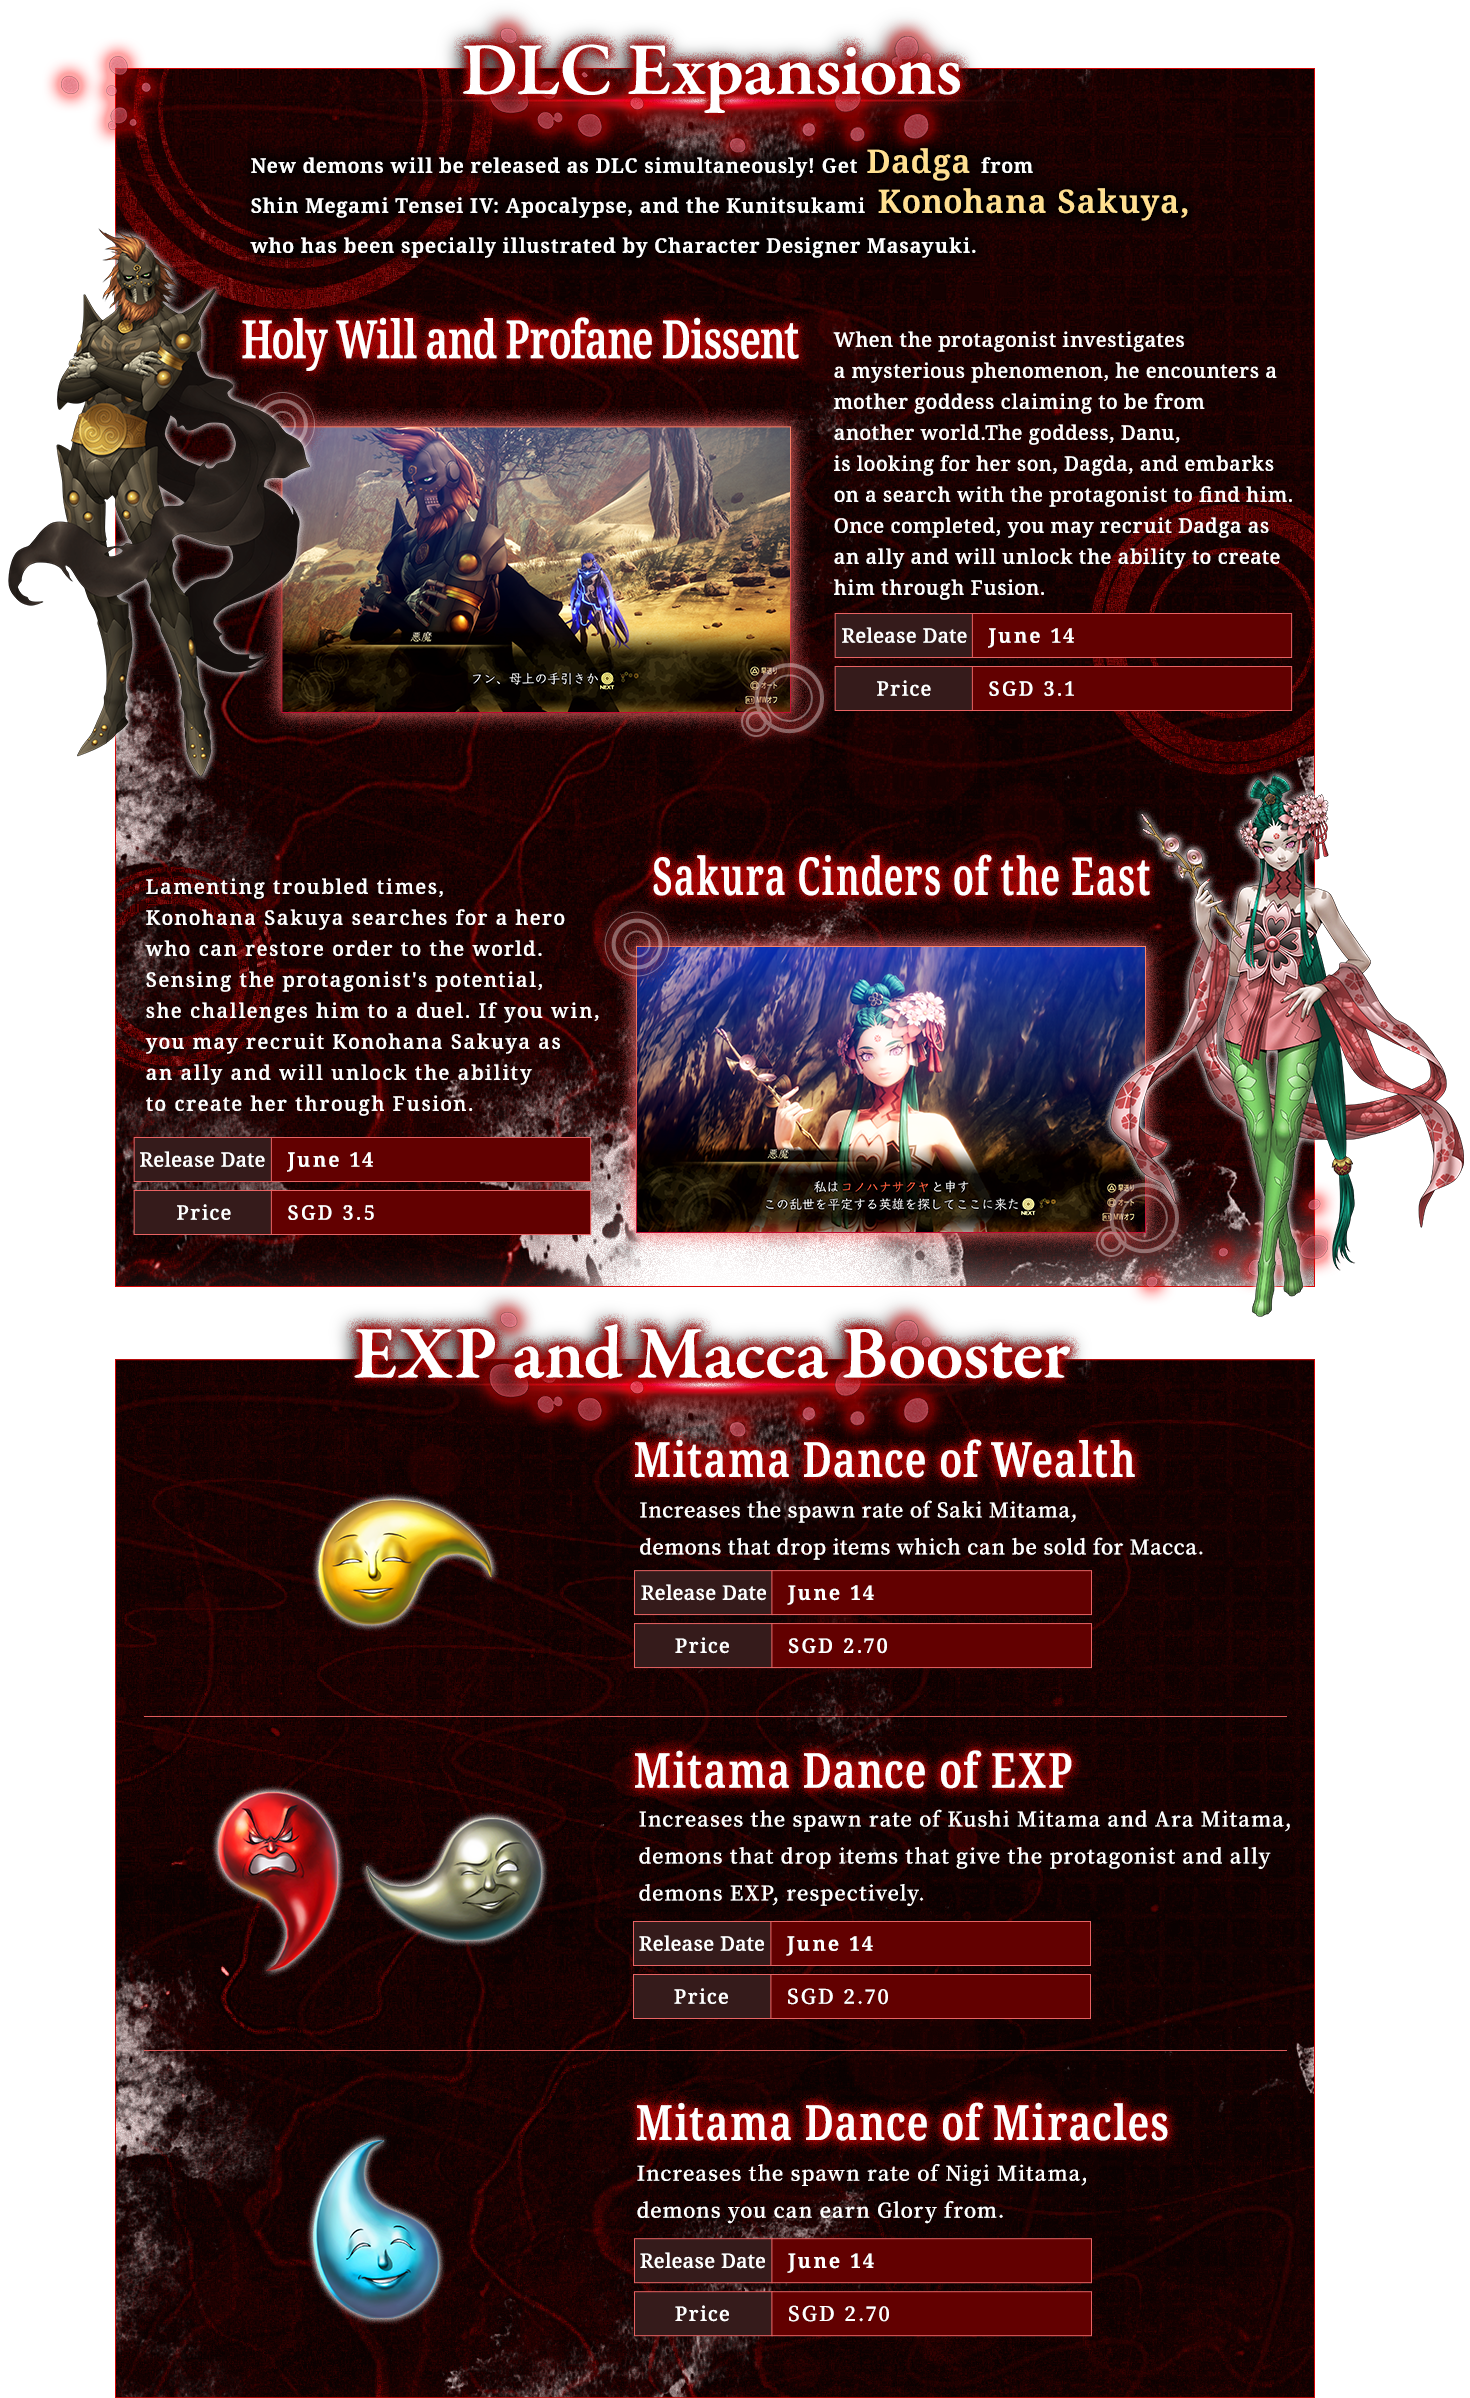 DLC Expansions / EXP and Macca Booster